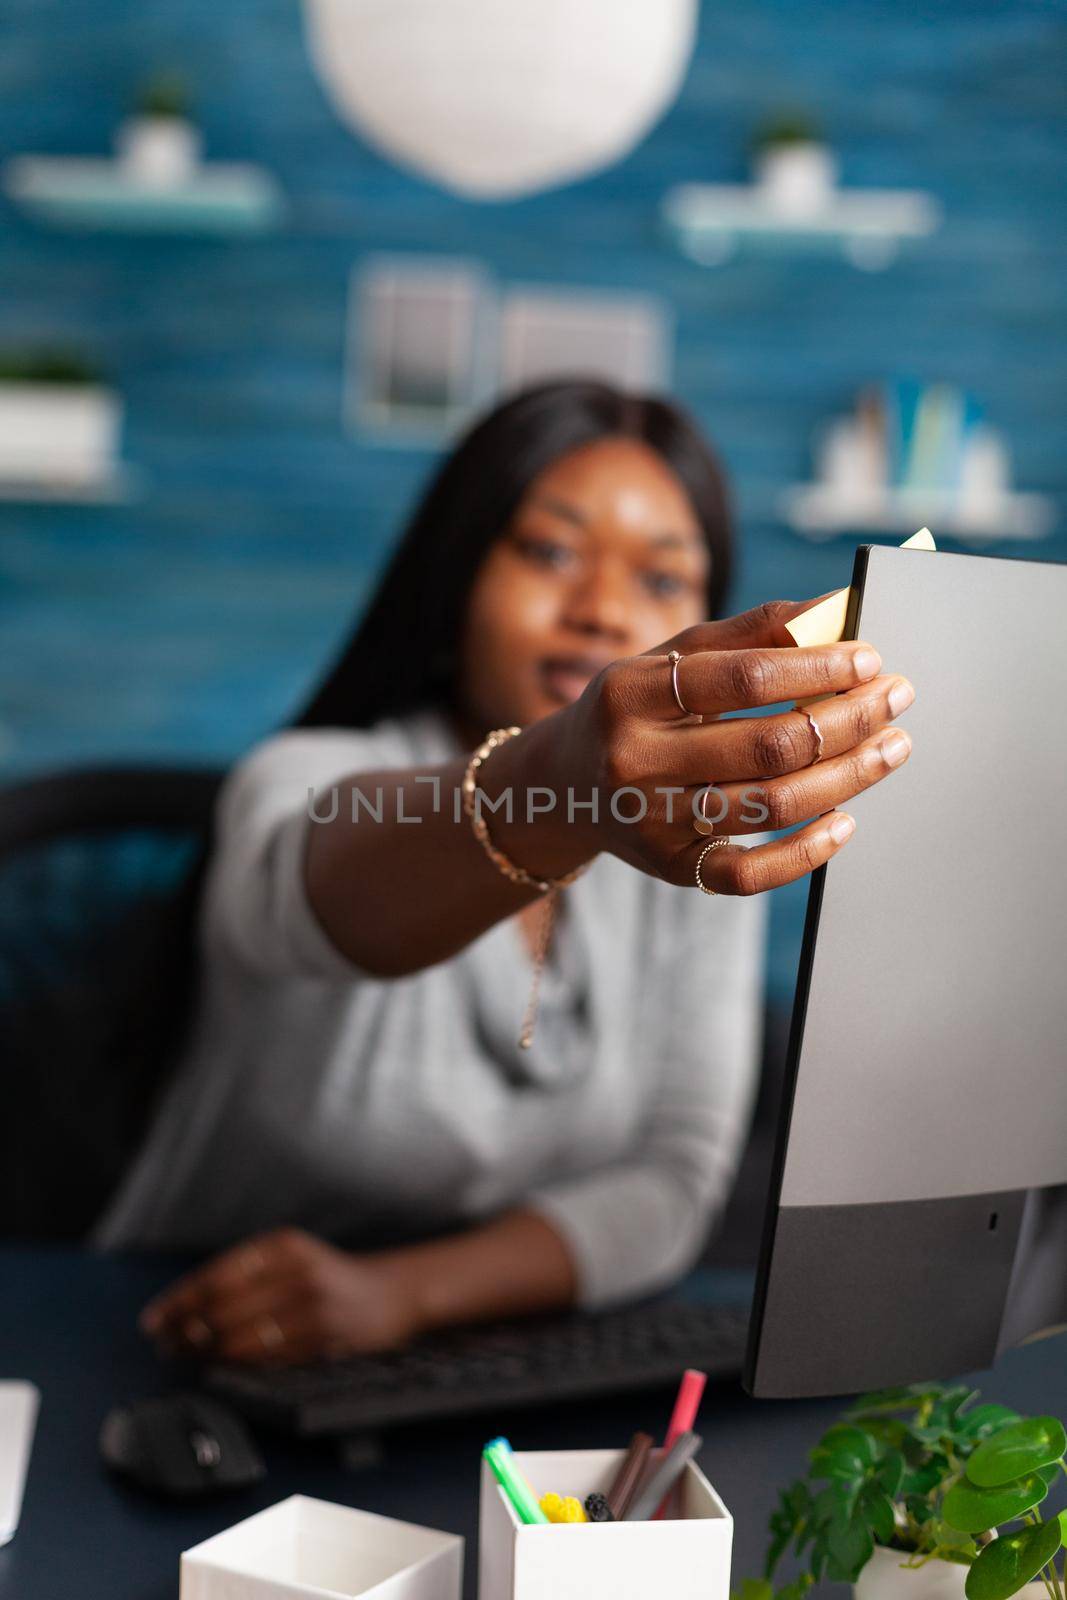 Student with dark skin putting stickey notes on computer studying communication lesson by DCStudio